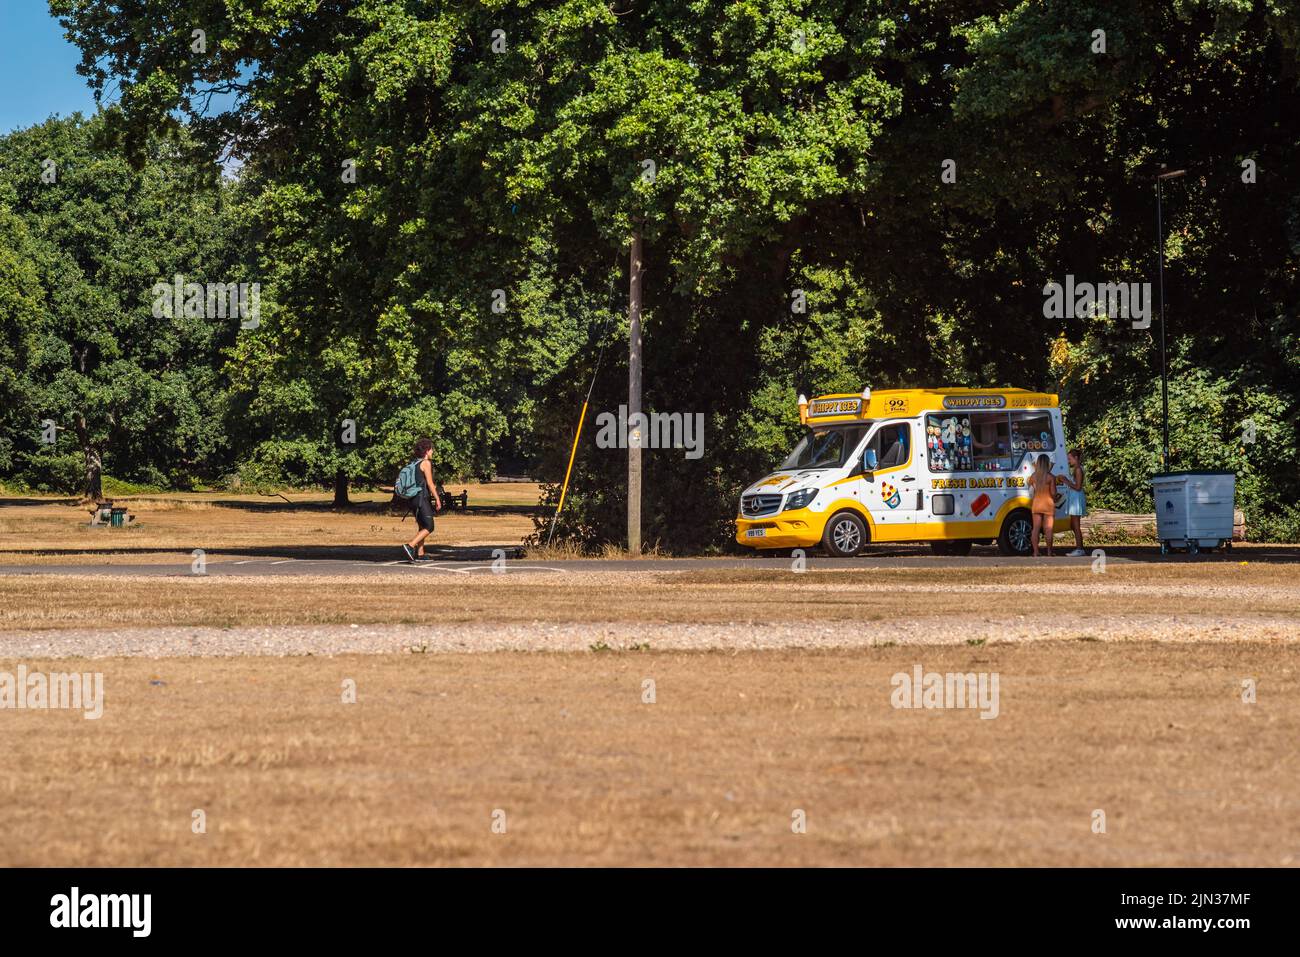 Southampton, Hampshire, UK. 8th of August 2022. Ice cream van parked in the shade at the Southampton Common Park during the July/ August heatwave in Southern England, UK Stock Photo